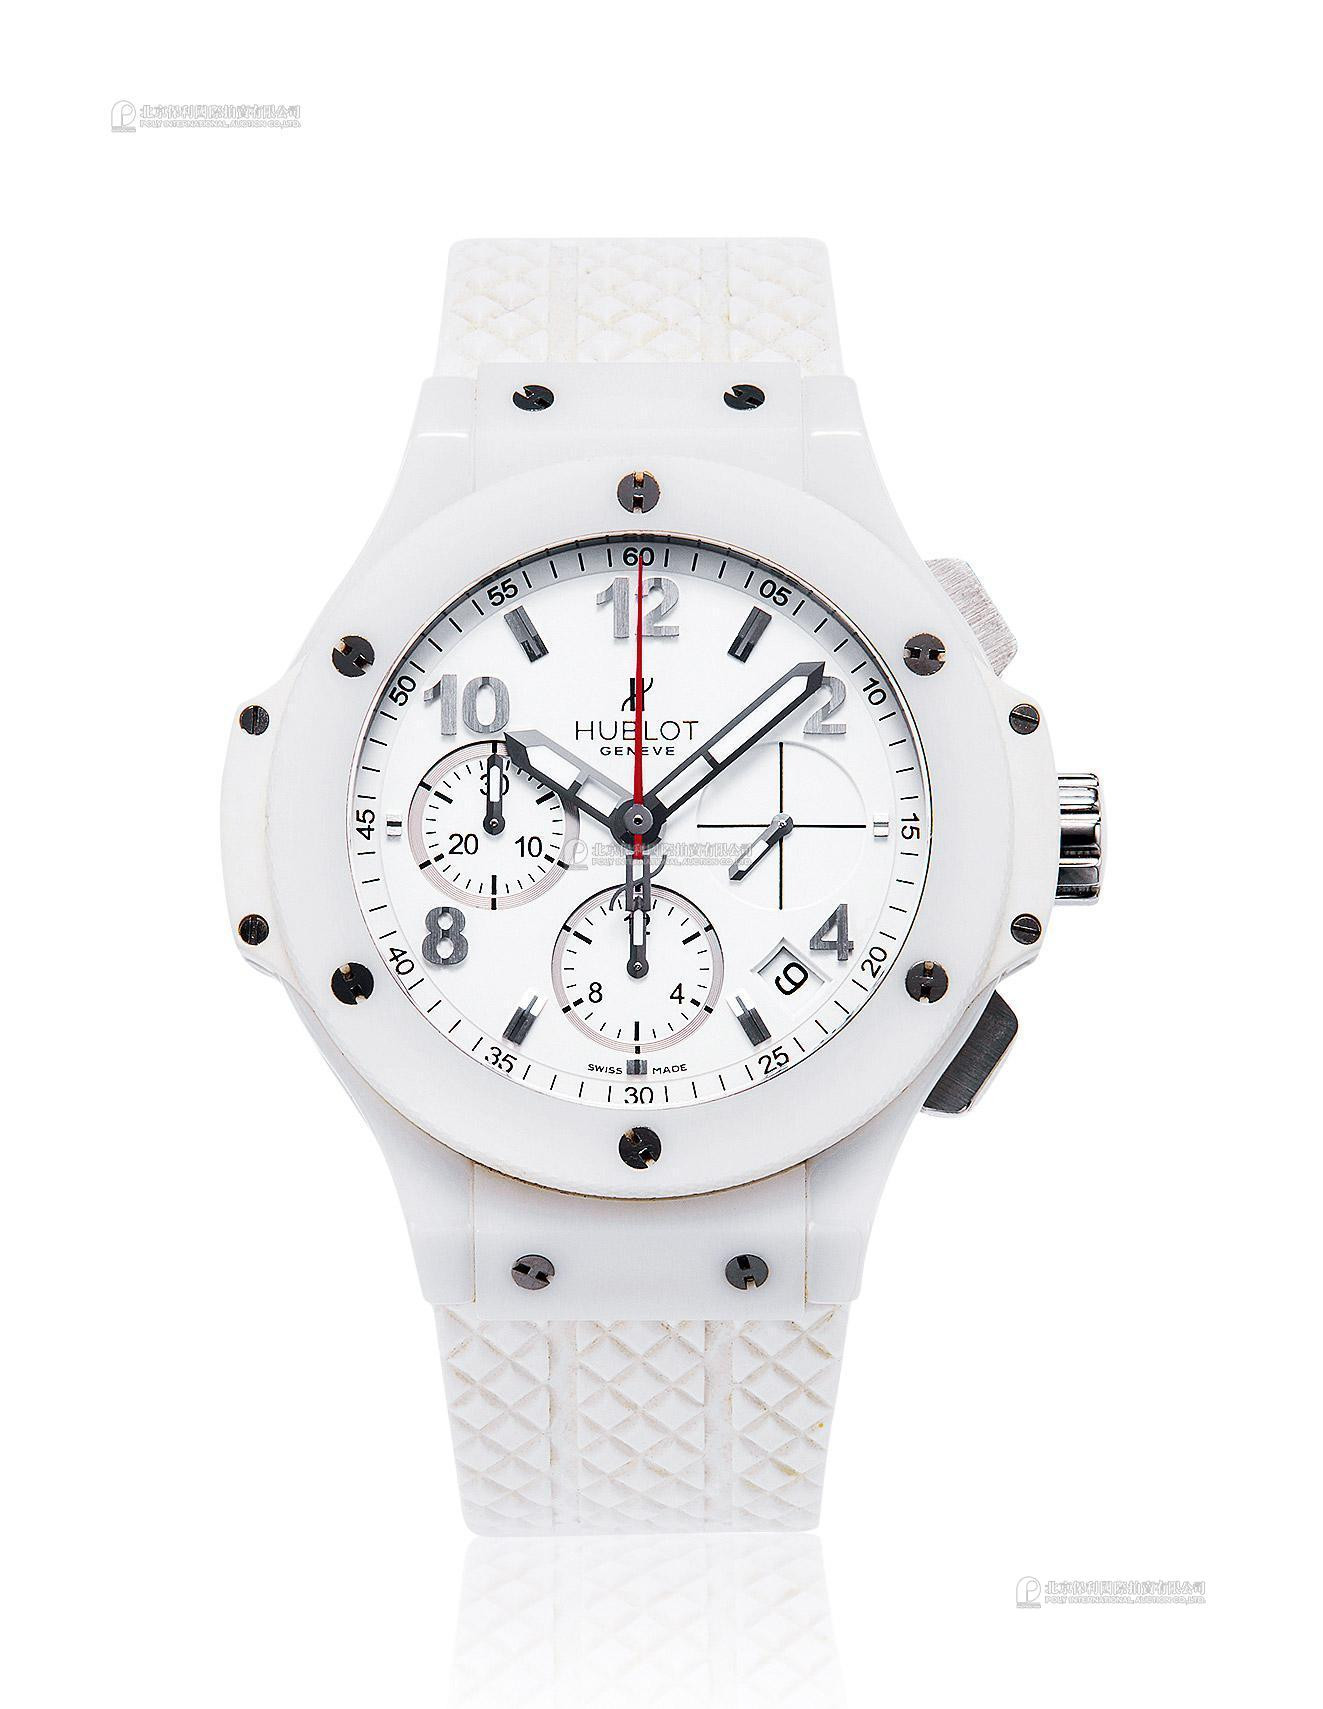 HUBLOT A CERAMIC CHRONOGRAPH AUTOMATIC WRISTWATCH WITH DATE INDICATION